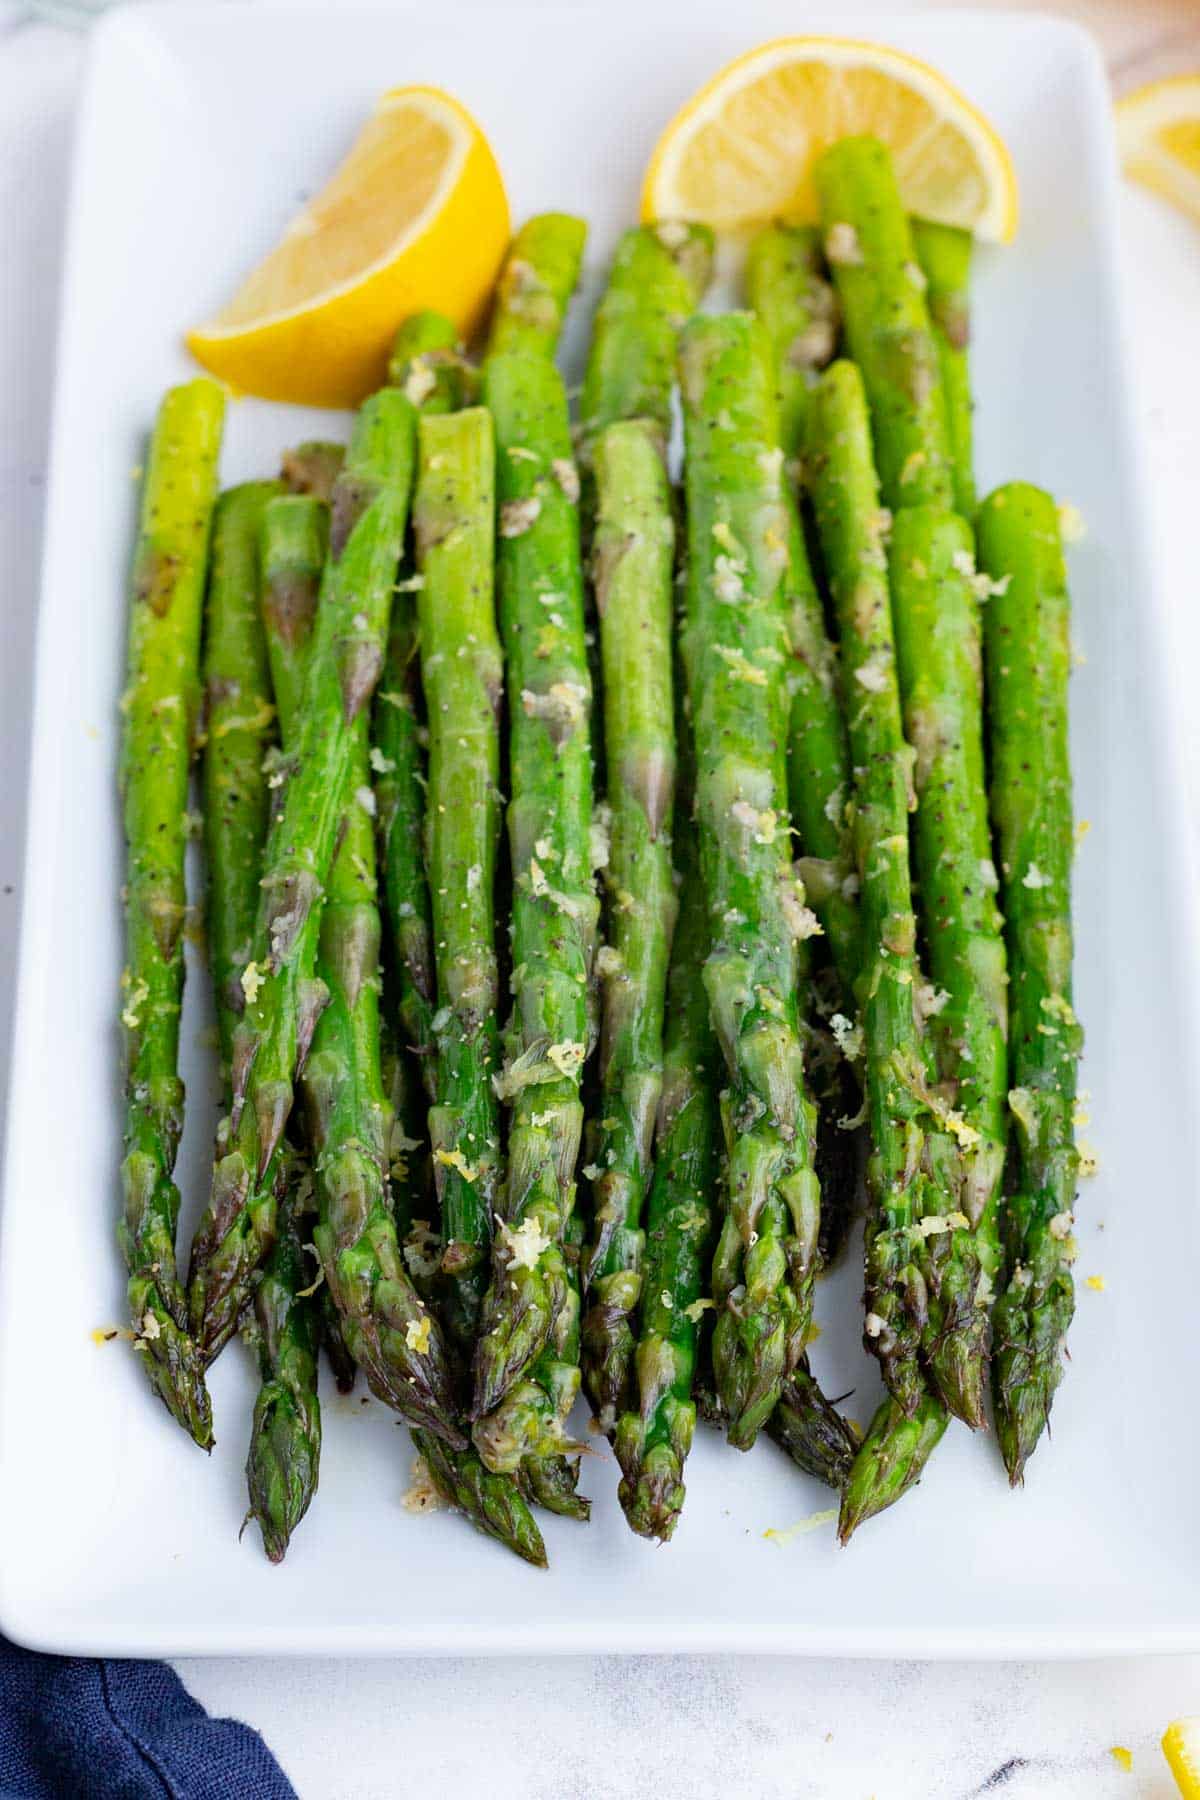 Asparagus spears are healthy and tender.